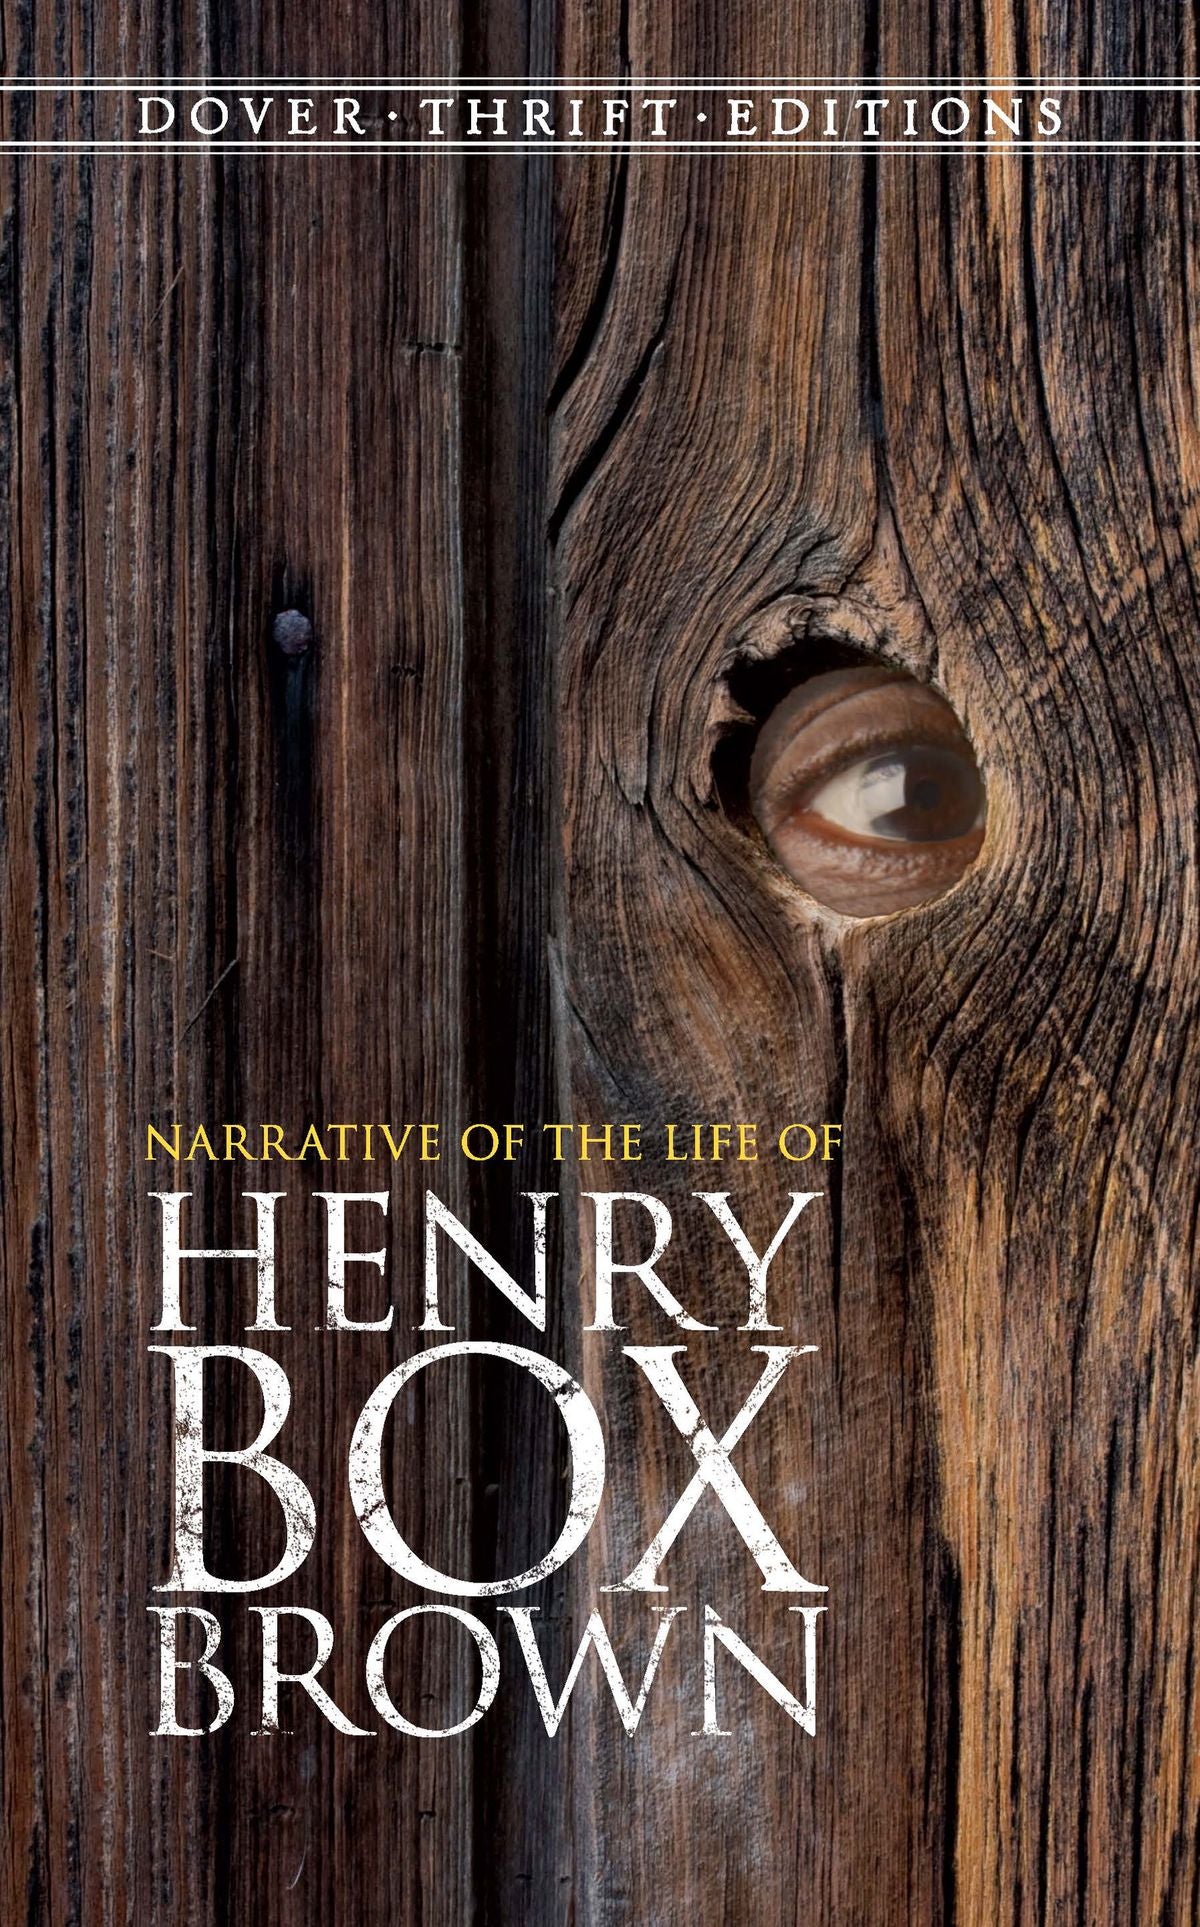 Narrative of the Life of Henry "Box" Brown